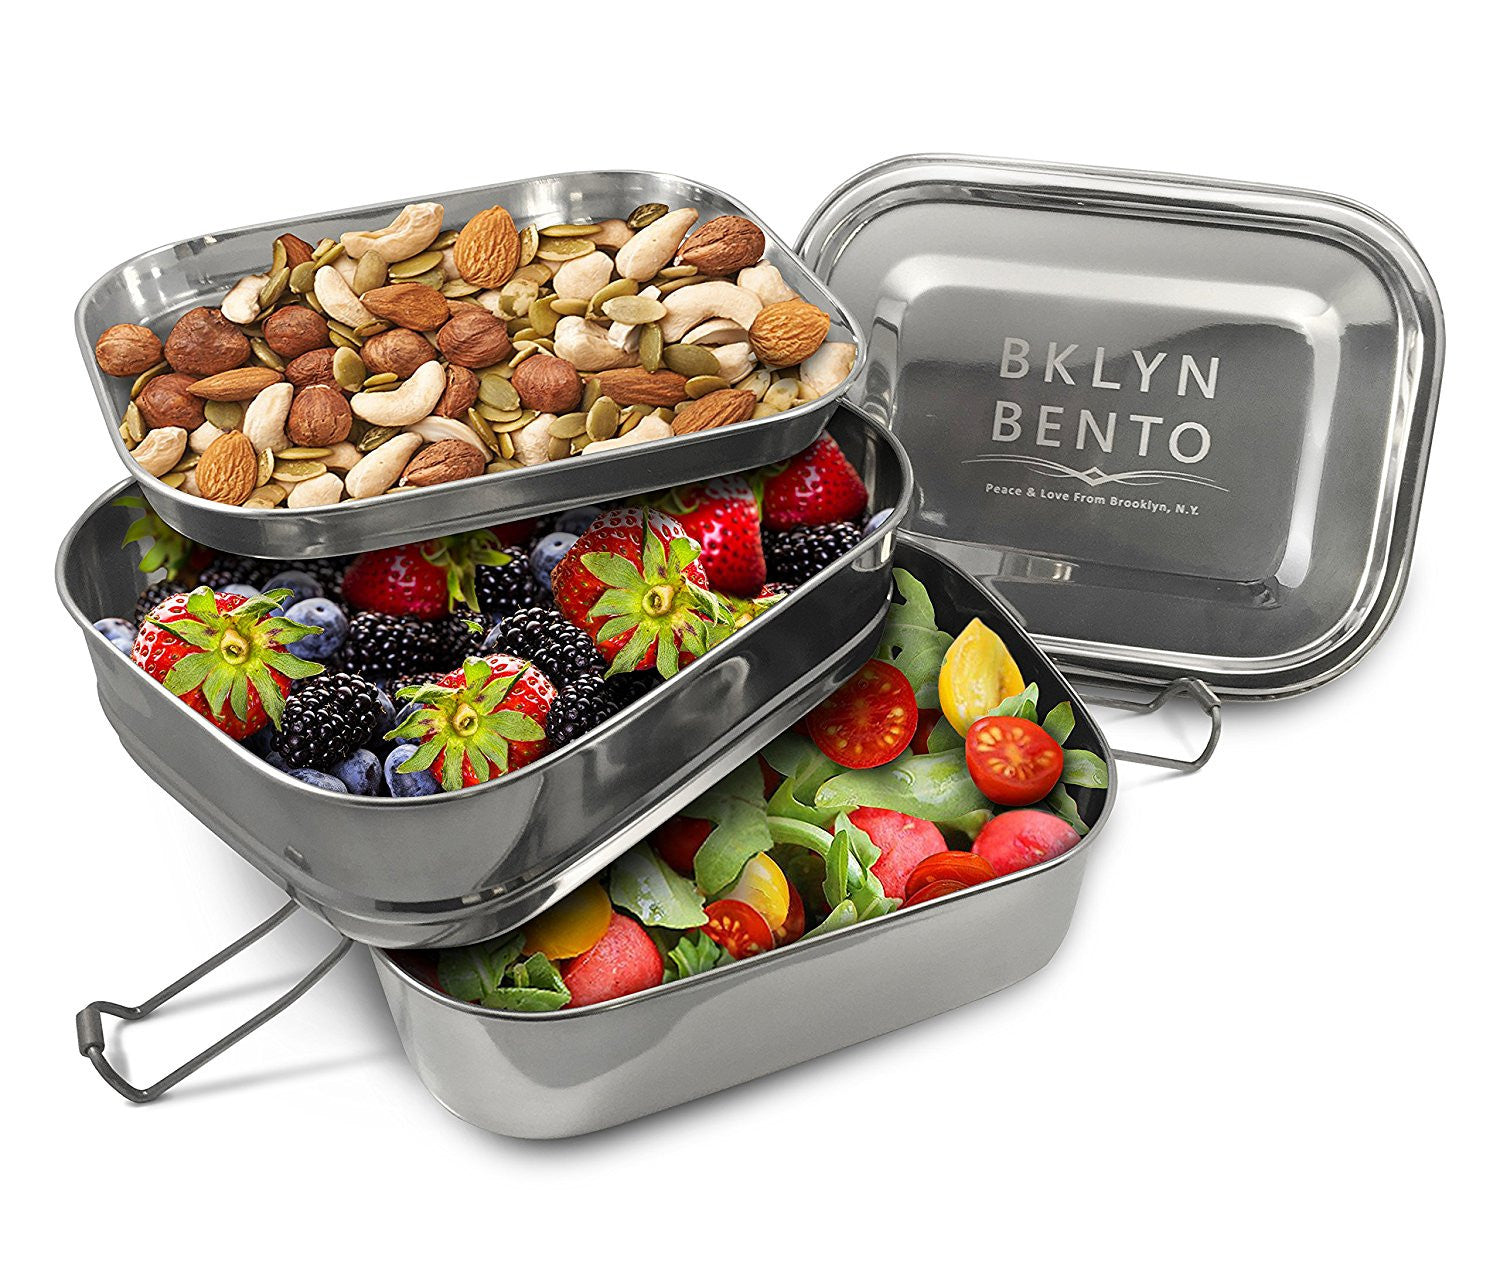 Bklyn Bento Large Round Stainless Steel Lunch Box Container with Removable Silicone Food Separator with Leakproof Lid